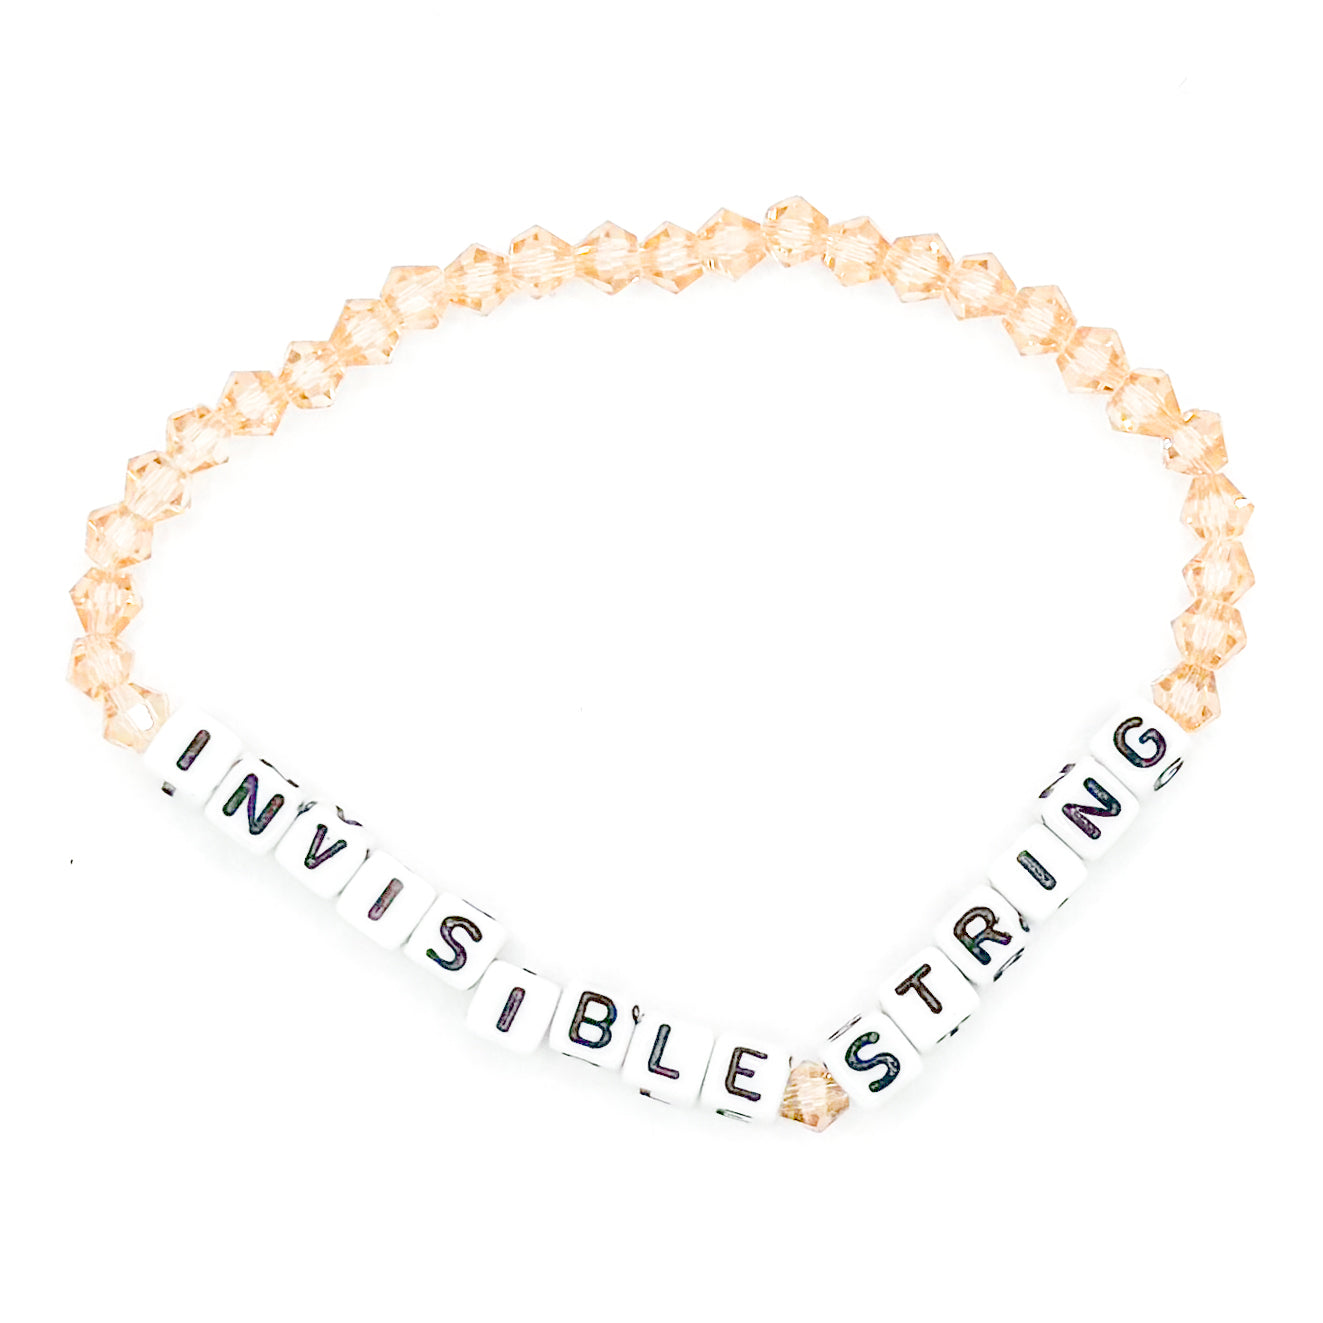 Tan "Invisible String" Bead Buddy Bracelets